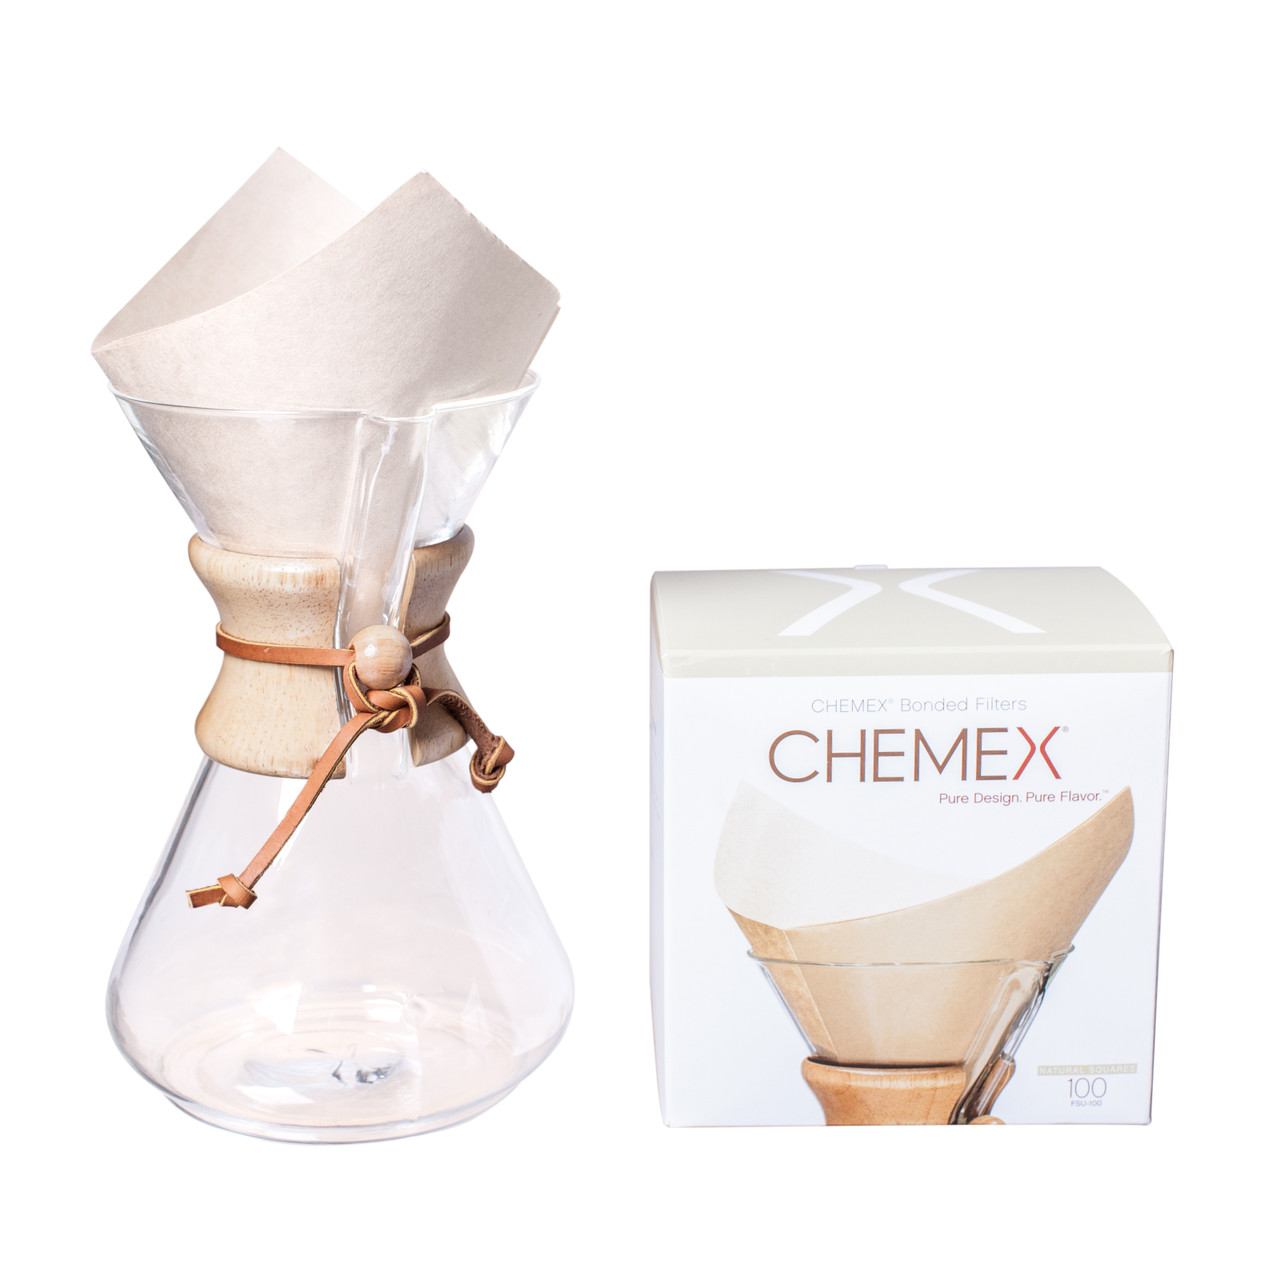 CHEMEX Bundle - 8-Cup Classic Series - 100 ct Square Filters - Exclusive  Packaging